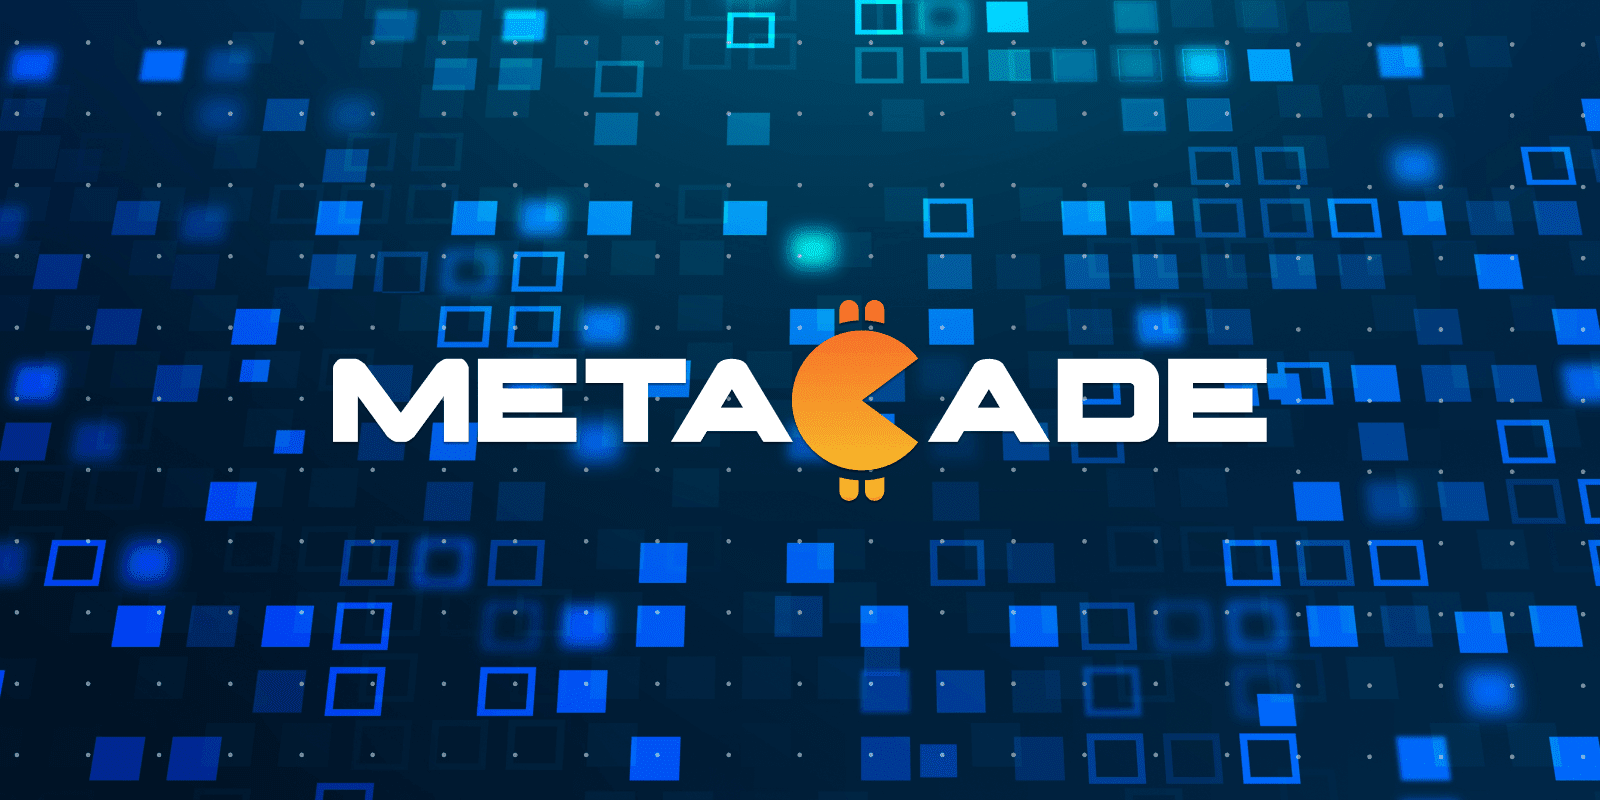 Optimistic Tone Lifts Cryptocurrency Market. Metacade, Post Presale, Holds Strong as It Lists on Exchanges